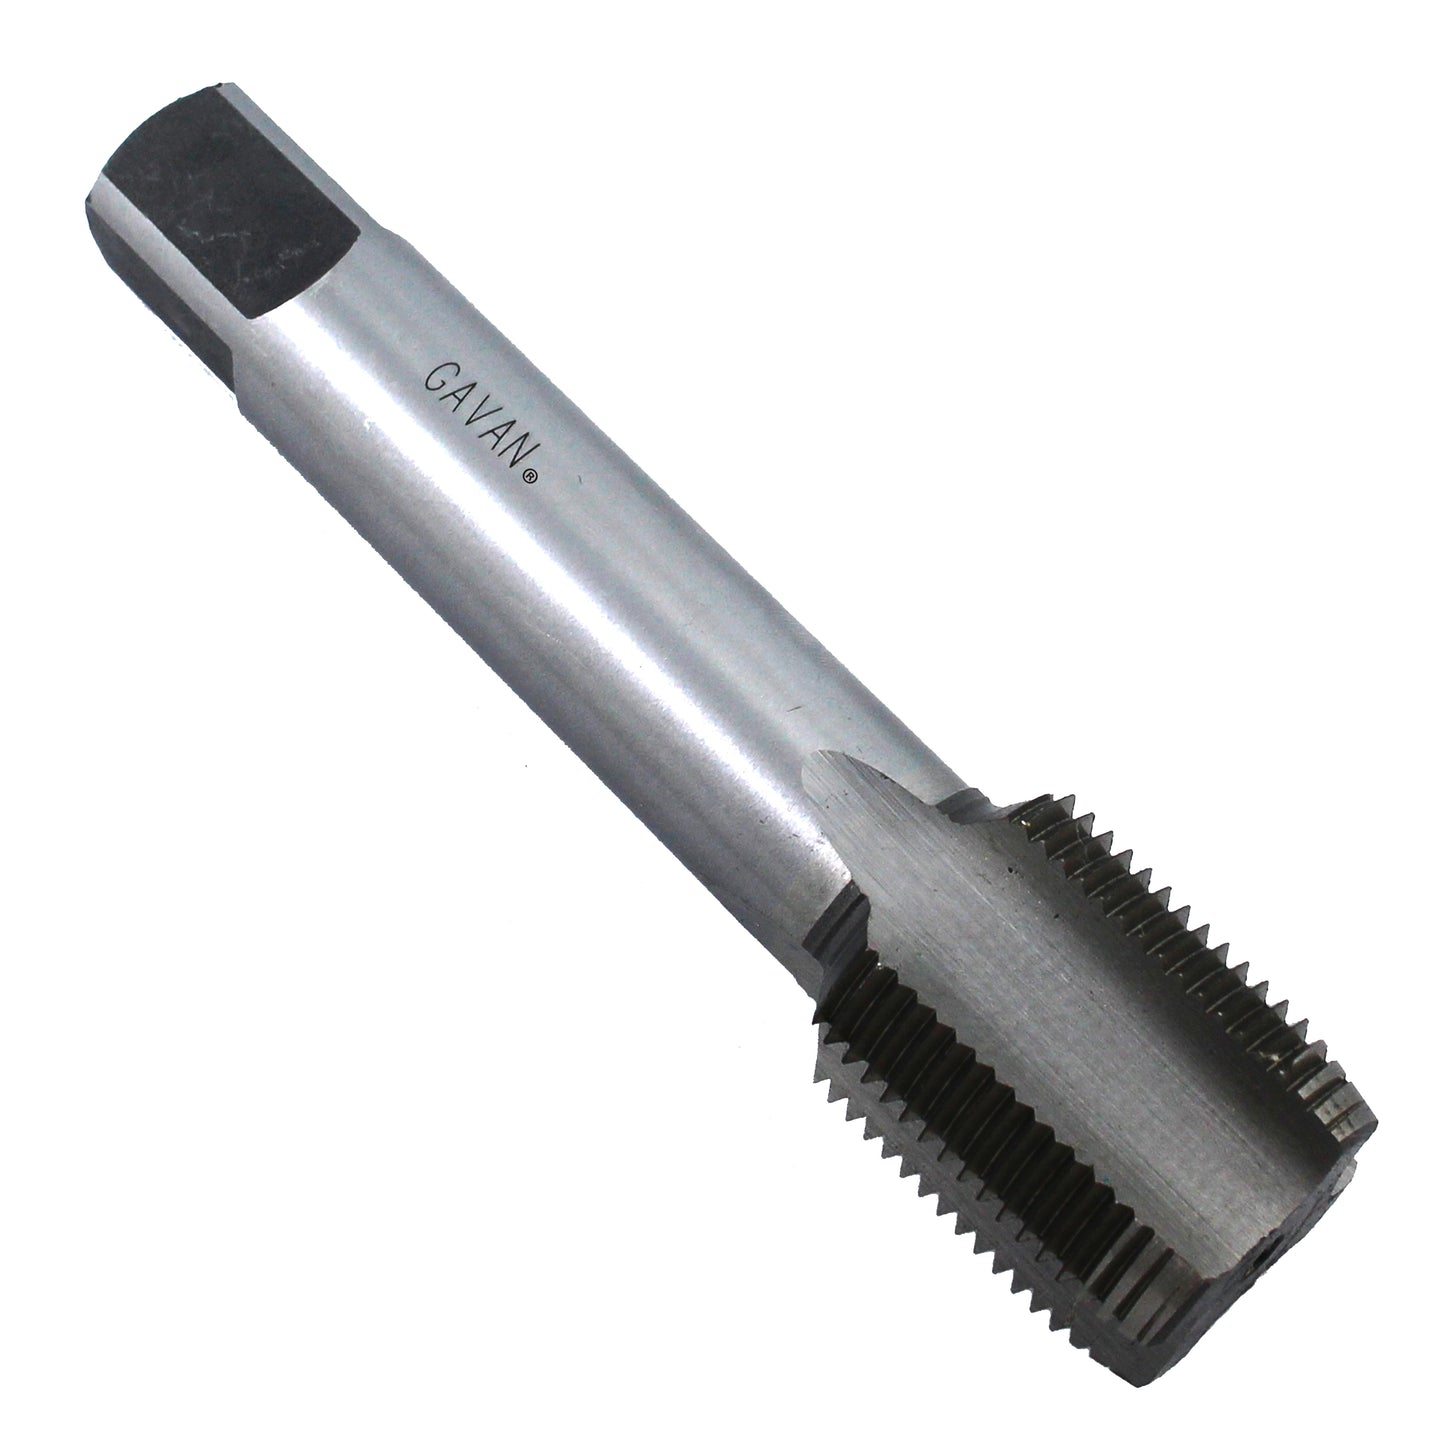 1 3/4" - 20 HSS Unified Right Hand Thread Tap